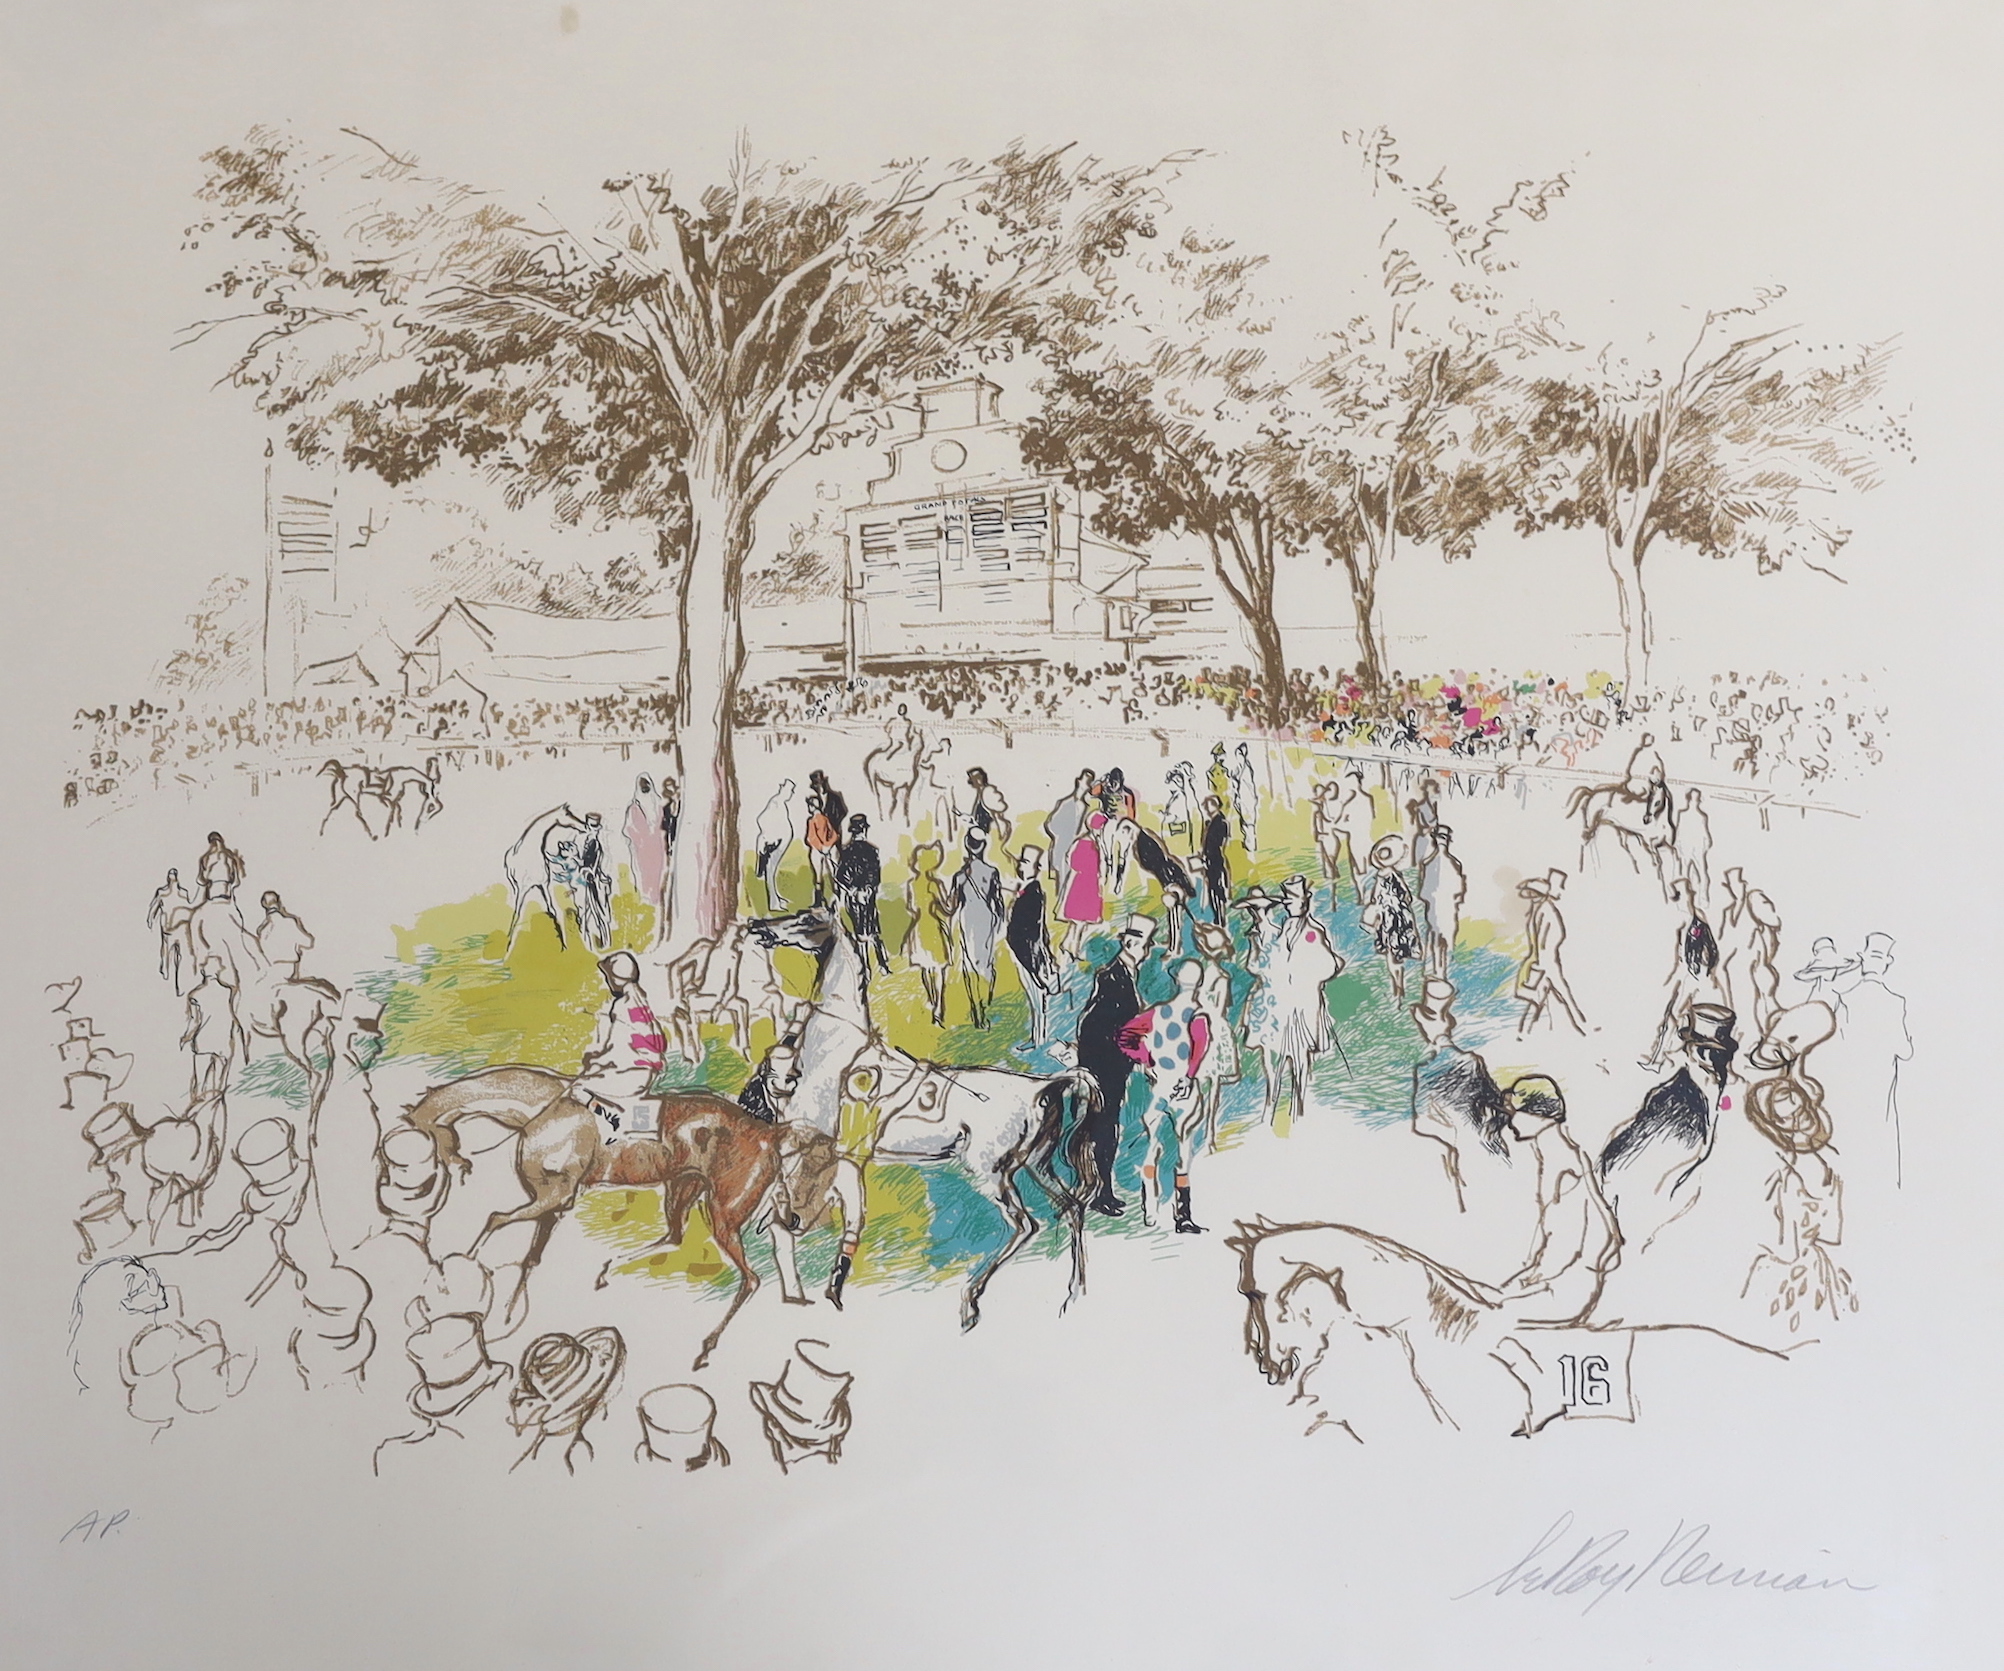 LeRoy Neiman (American, 1921-2012), artist proof colour serigraph, 'Ascot Paddock', signed in pencil, 73 x 88cm